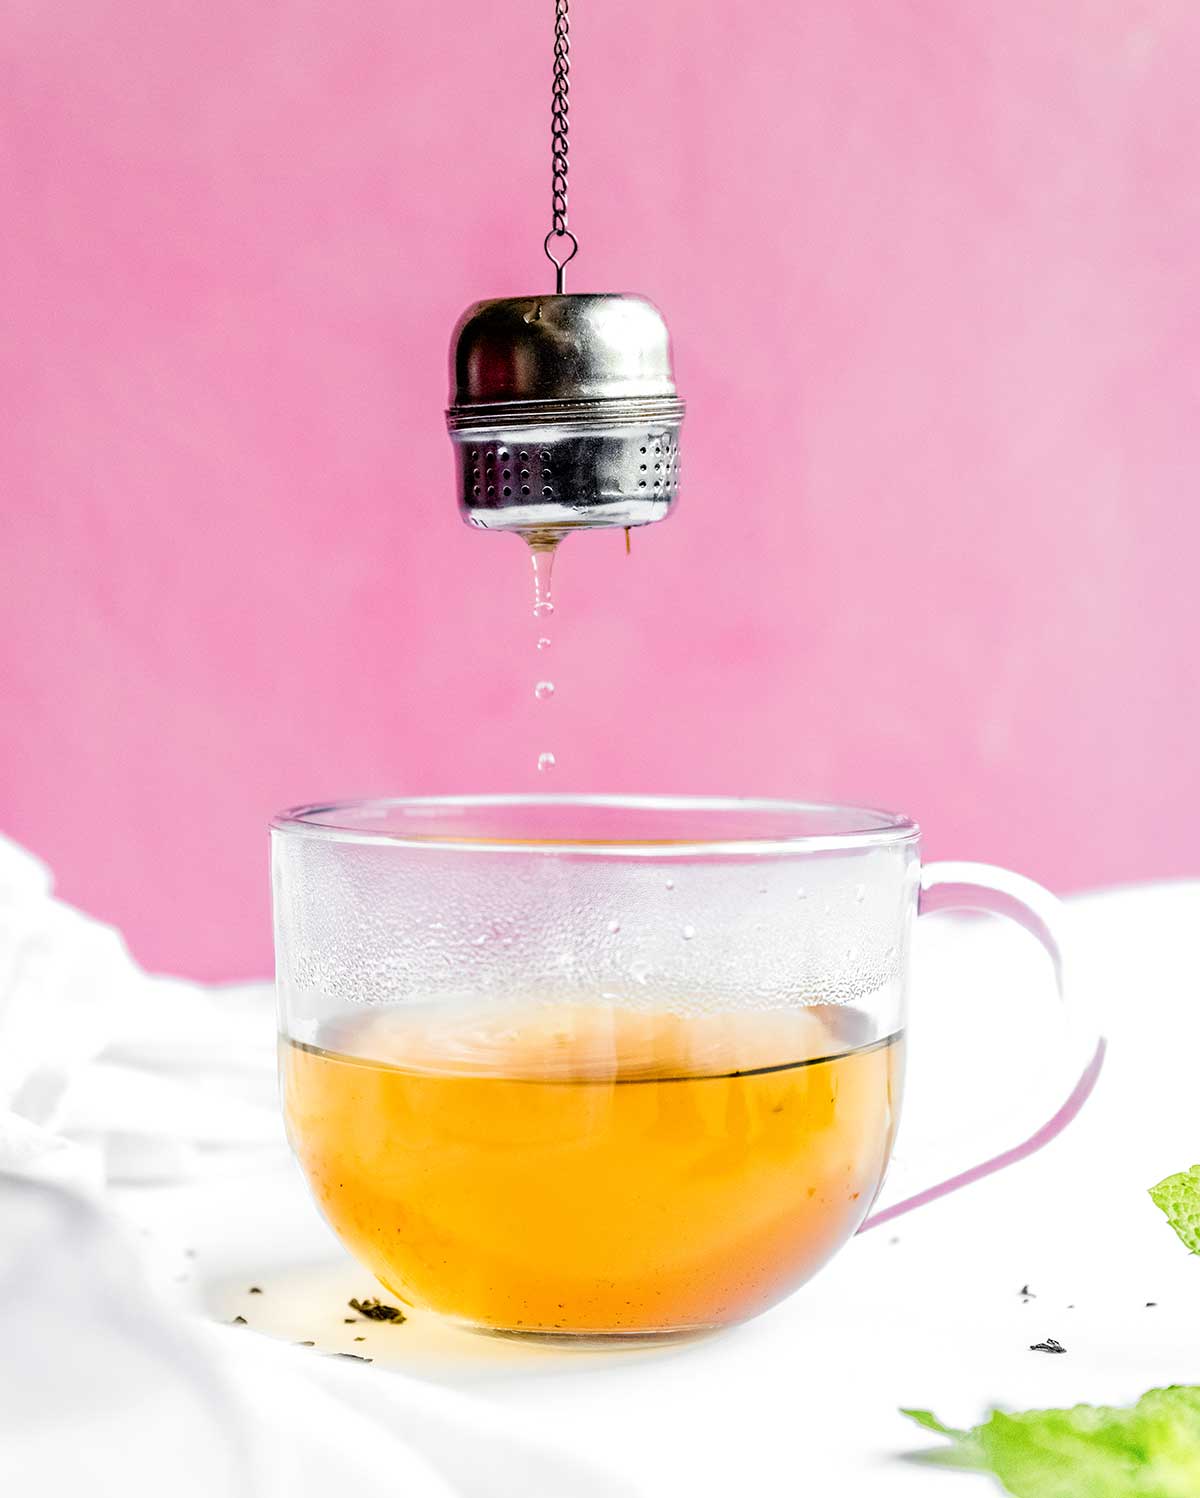 Adding loose leaf tea to a glass on a pink background